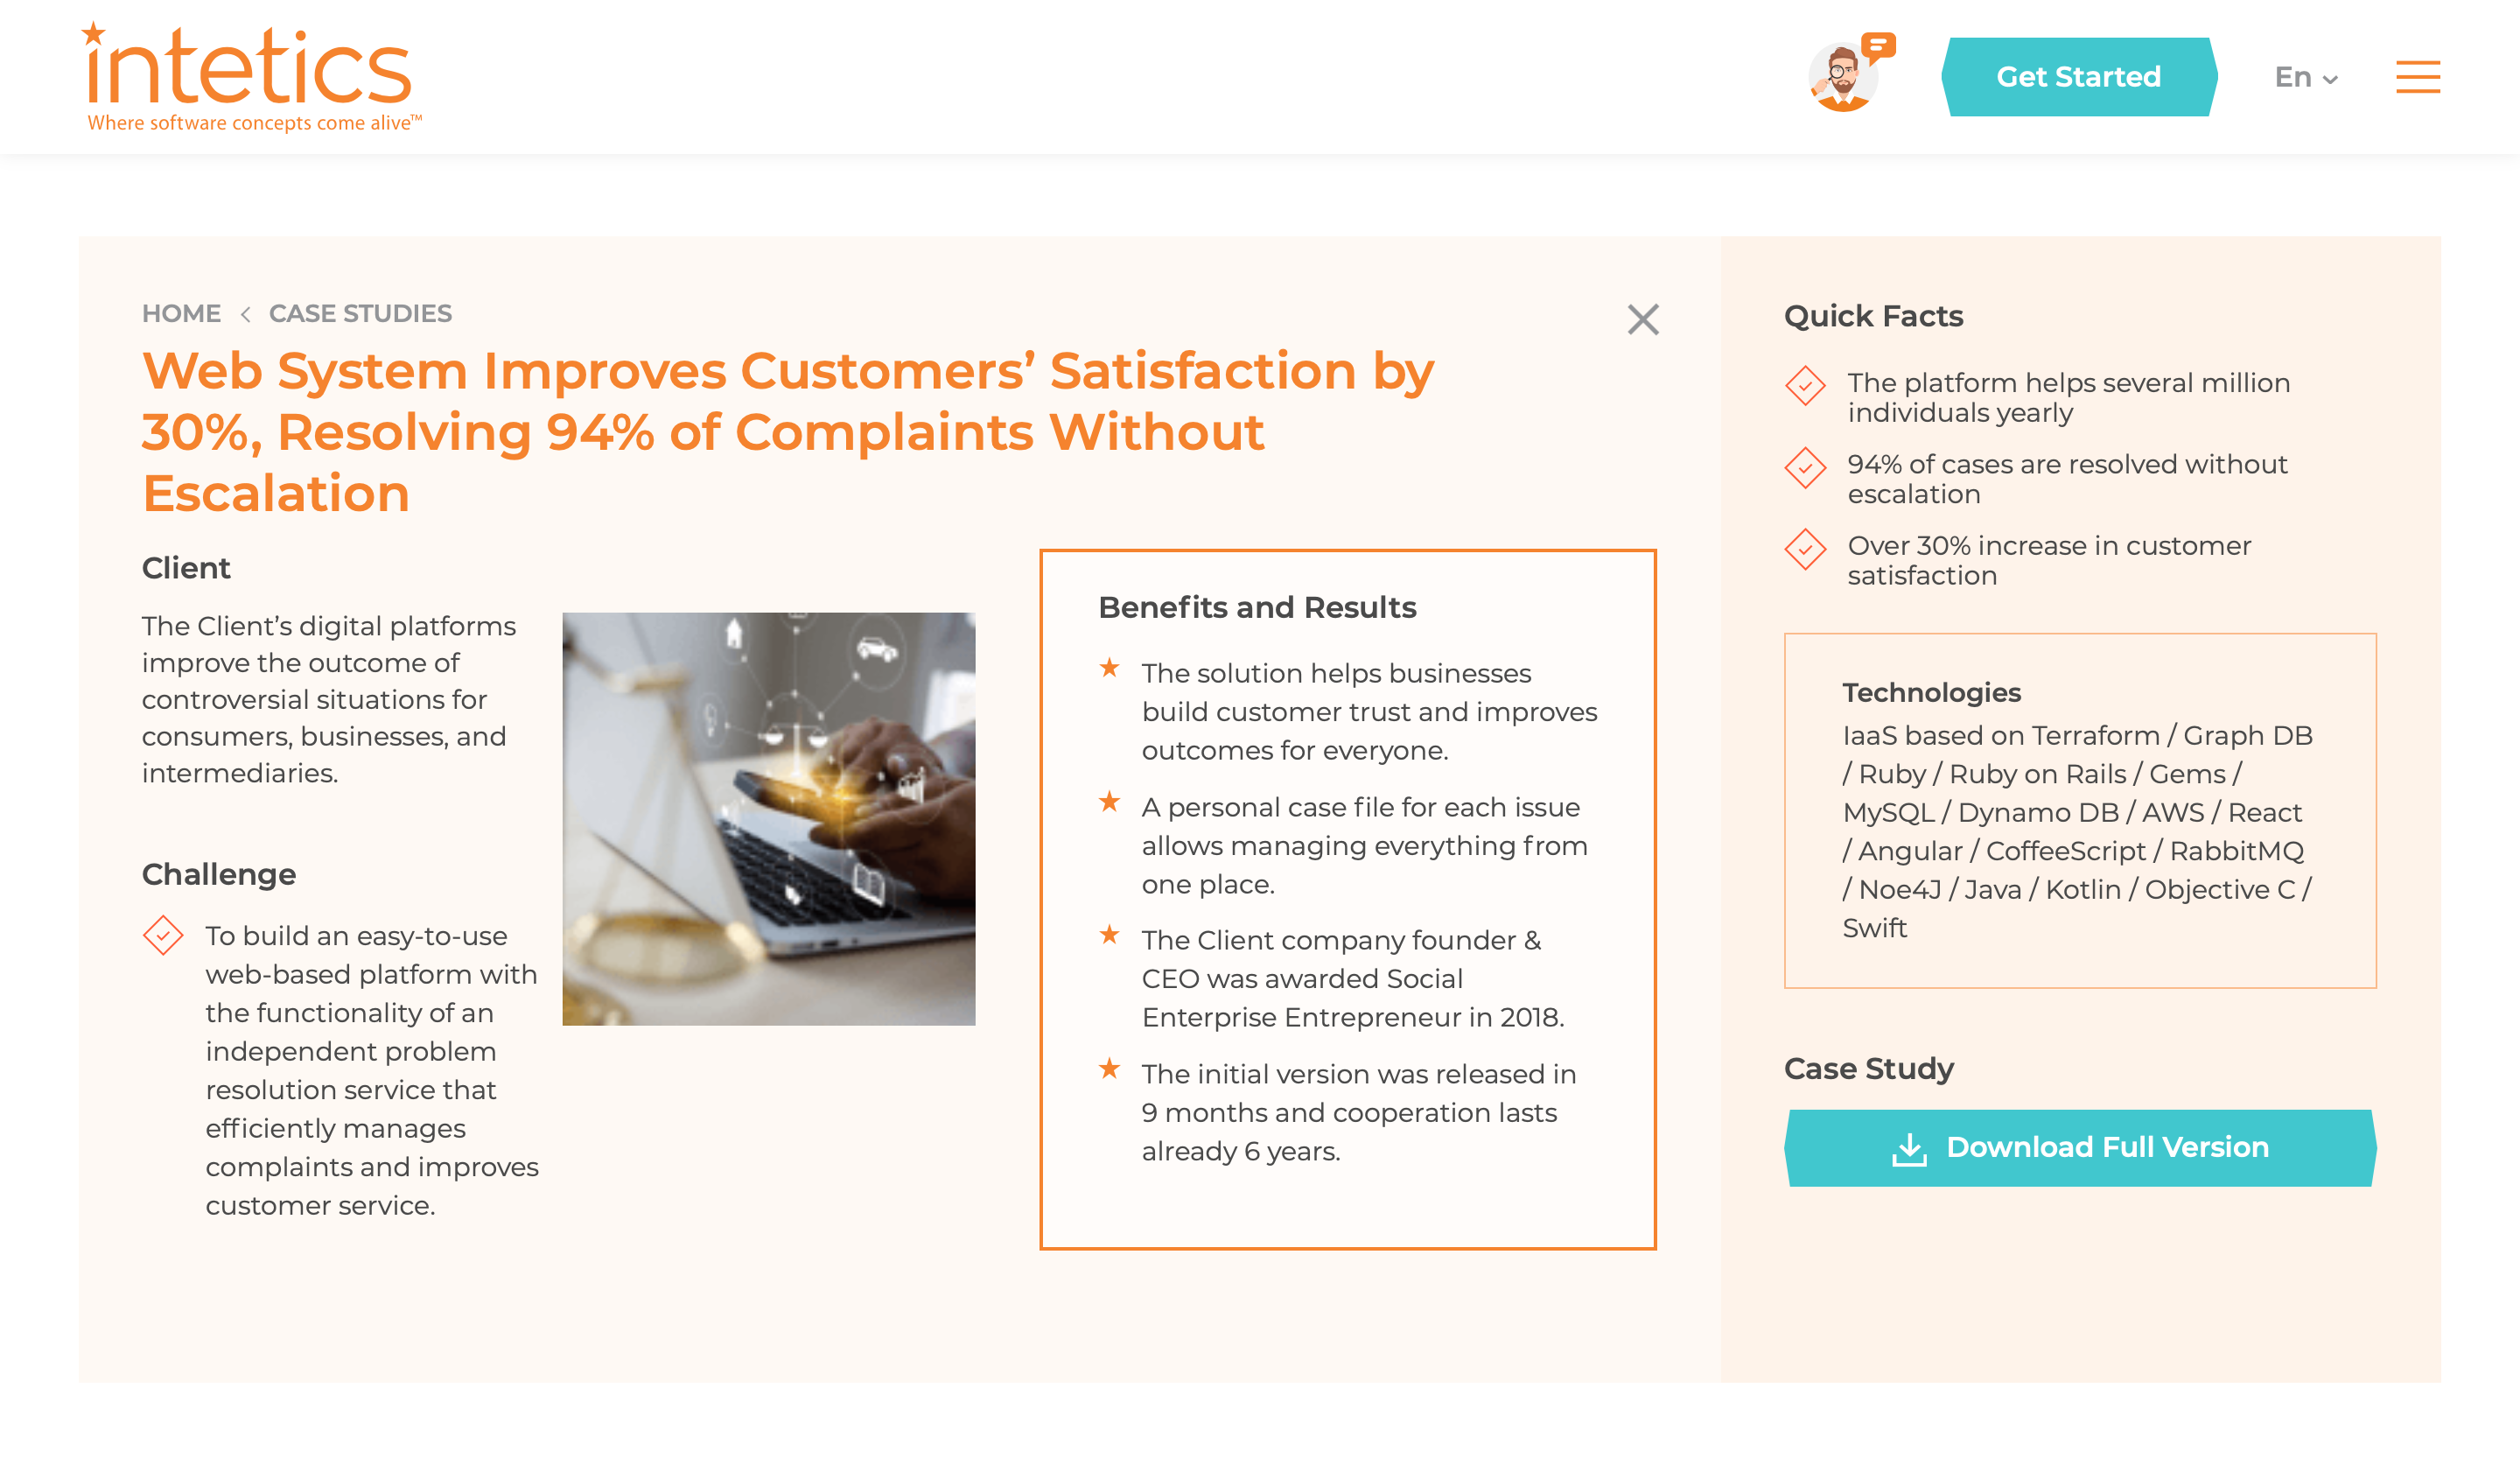 Web System Improves Customers' Satisfaction by 30 pc Resolving 94 pc of Complaints Without Escalation